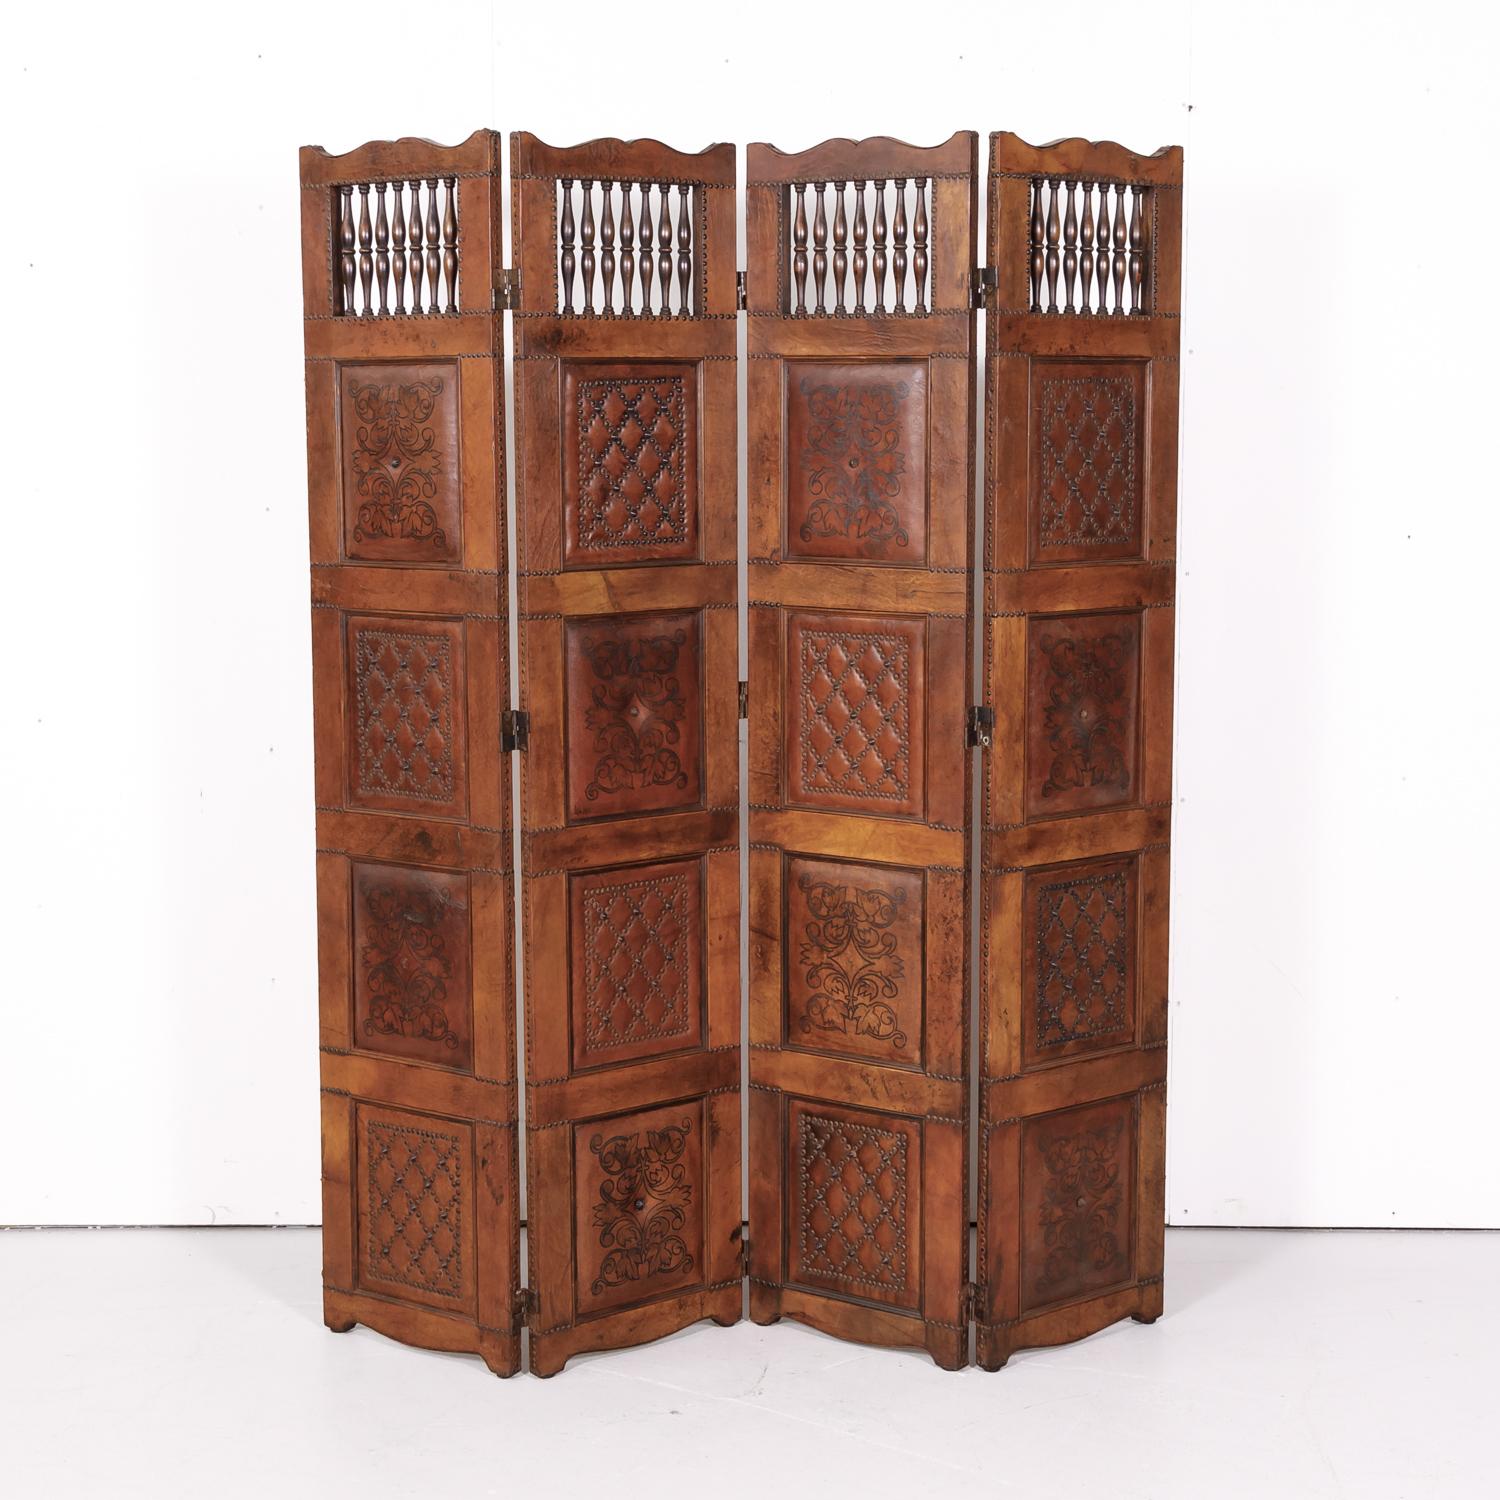 An early 20th century Spanish four-panel embossed leather screen handcrafted in Barcelona, circa 1900. This wonderful screen features four leather wrapped panels with walnut spindles each having four hand embossed leather panels with nailhead trim